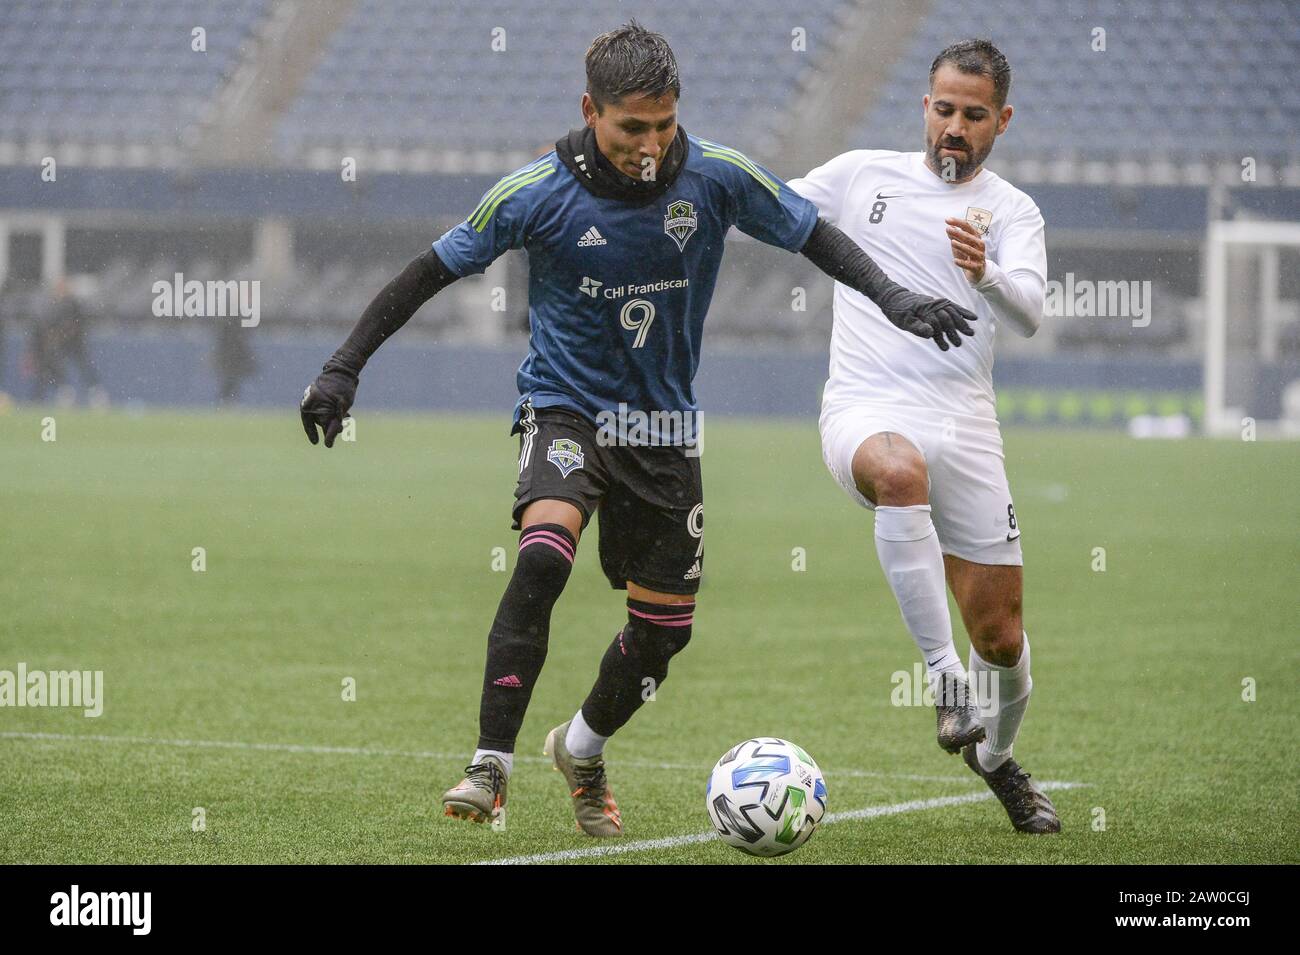 Seattle, Washington, USA. 5th Feb, 2020. The Seattle Sounder Raul Ruidiaz (9) in action as the Sacramento Republic FC visits the Seattle Sounders in a friendly preseason match at Century Link Field in Seattle, WA. Credit: Jeff Halstead/ZUMA Wire/Alamy Live News Stock Photo